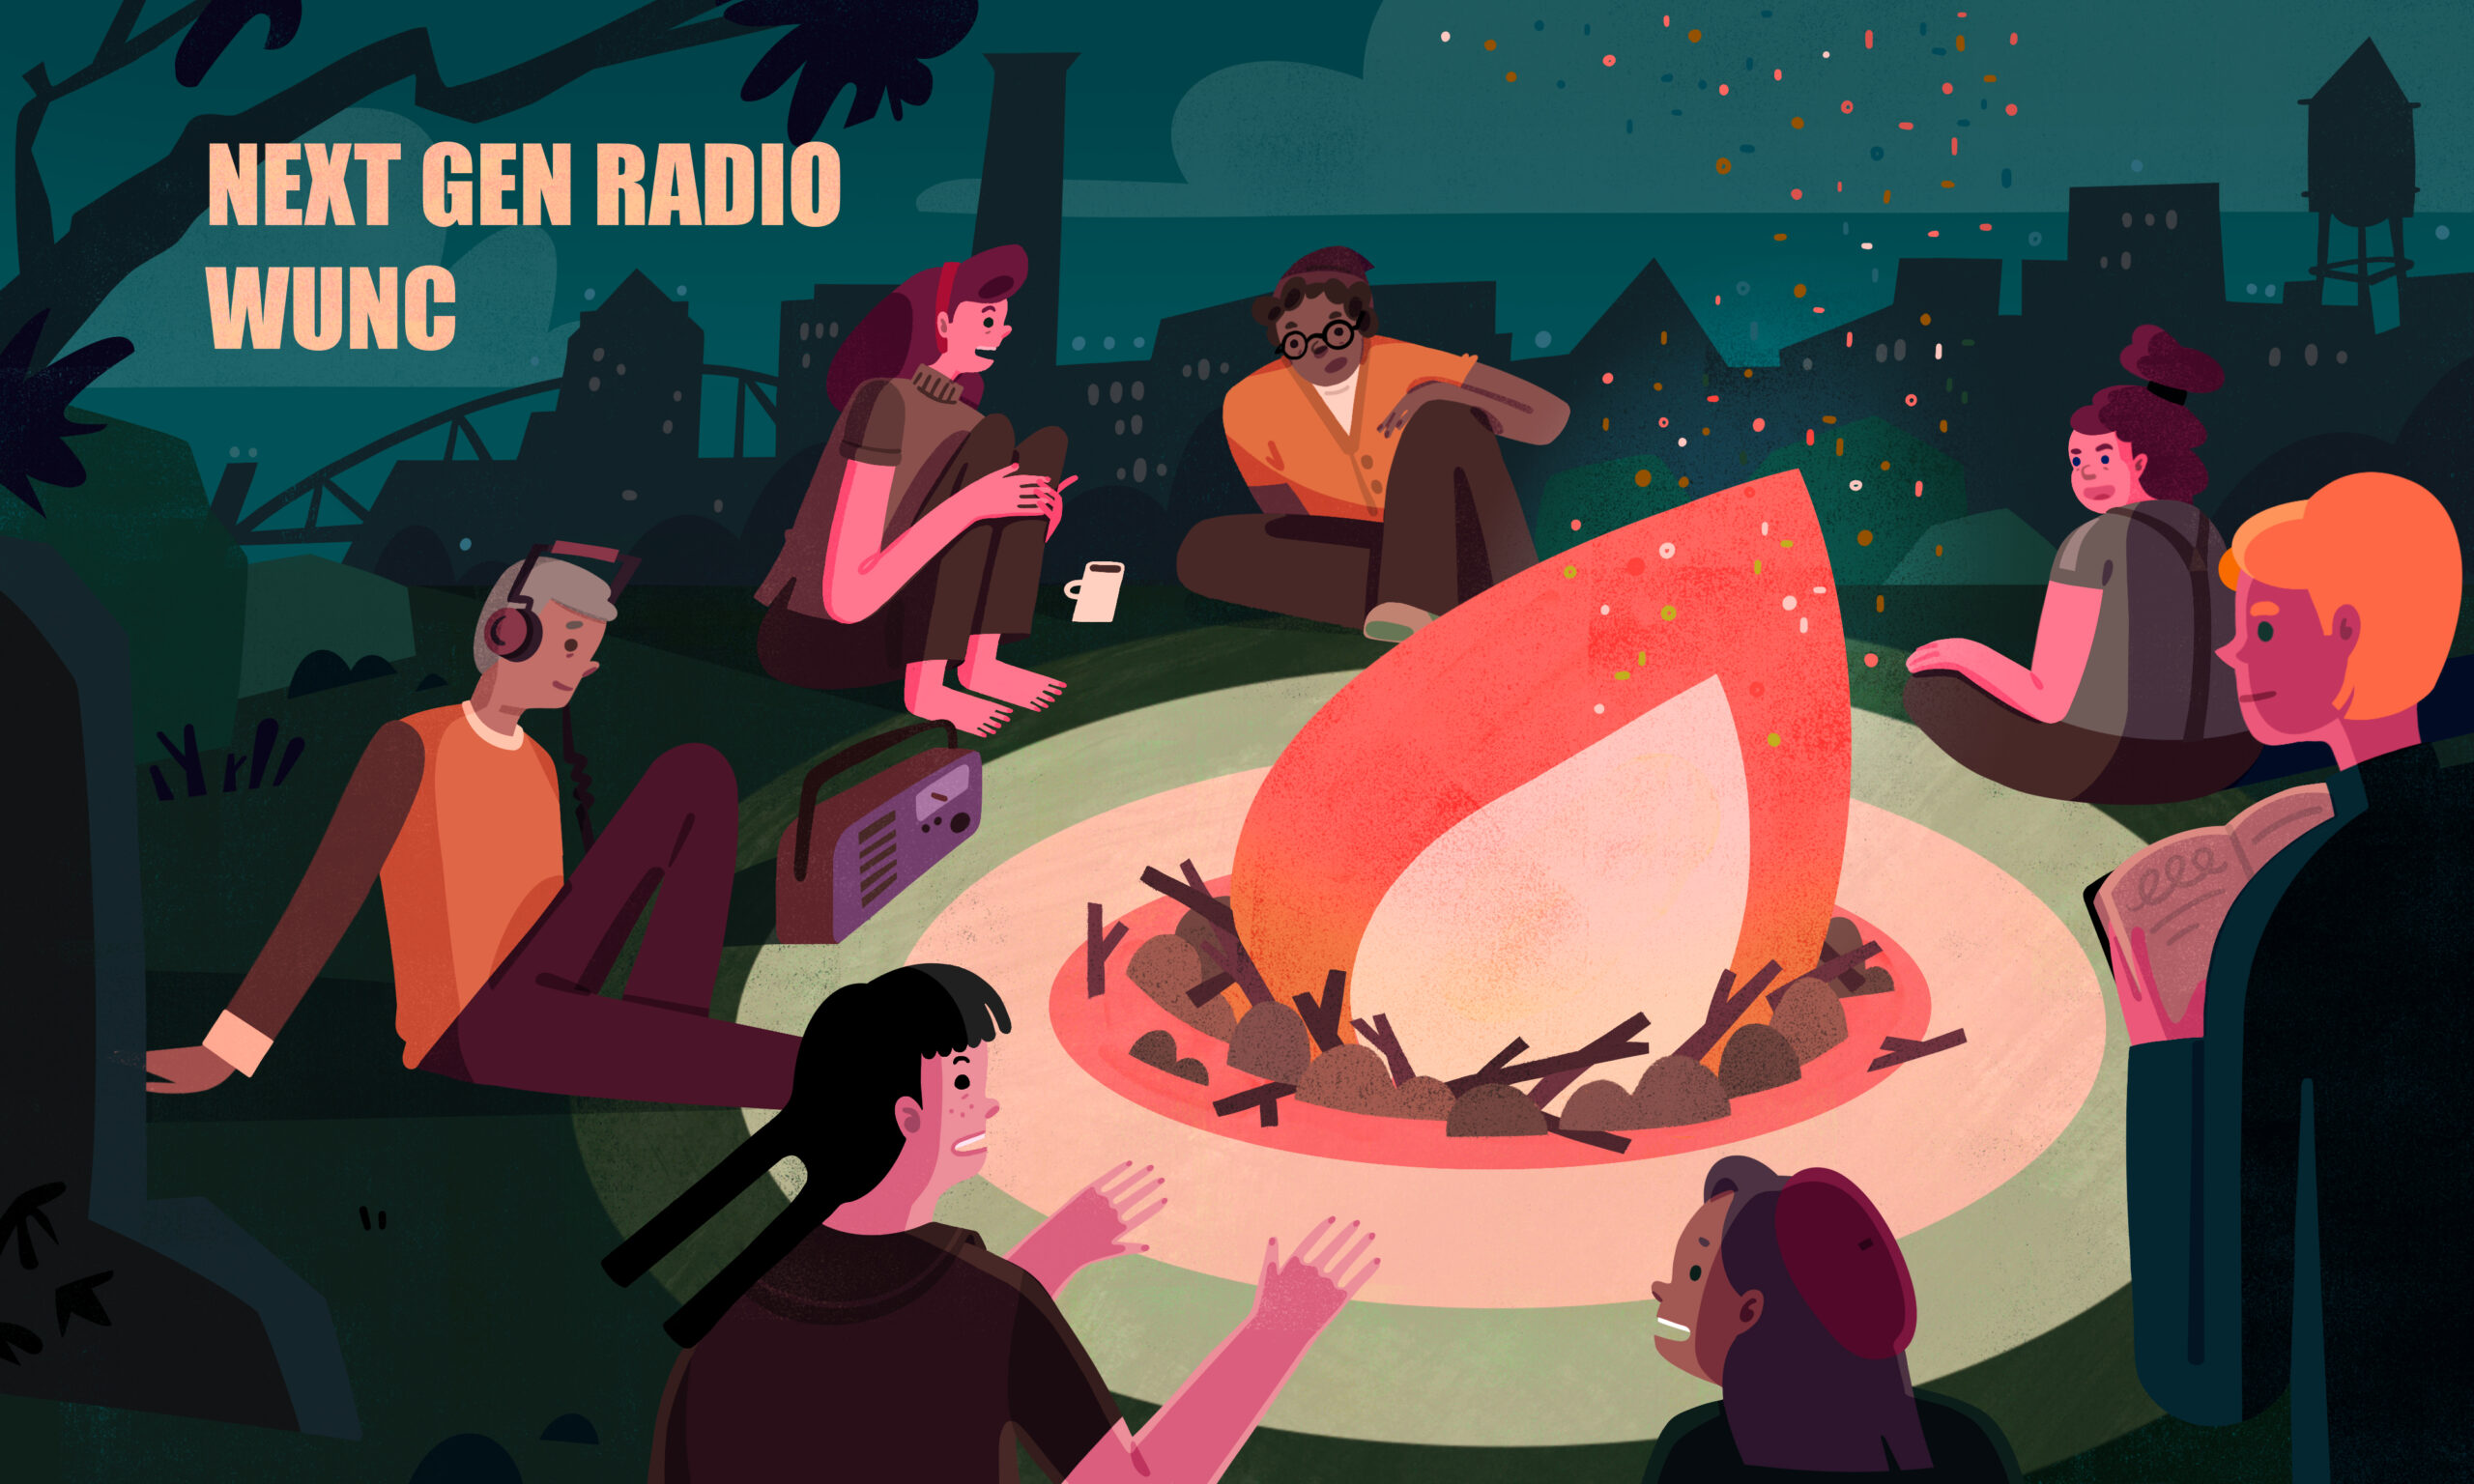 Illustration of a storytelling scene with 6 people around a campfire for WUNC Next Generation Radio.